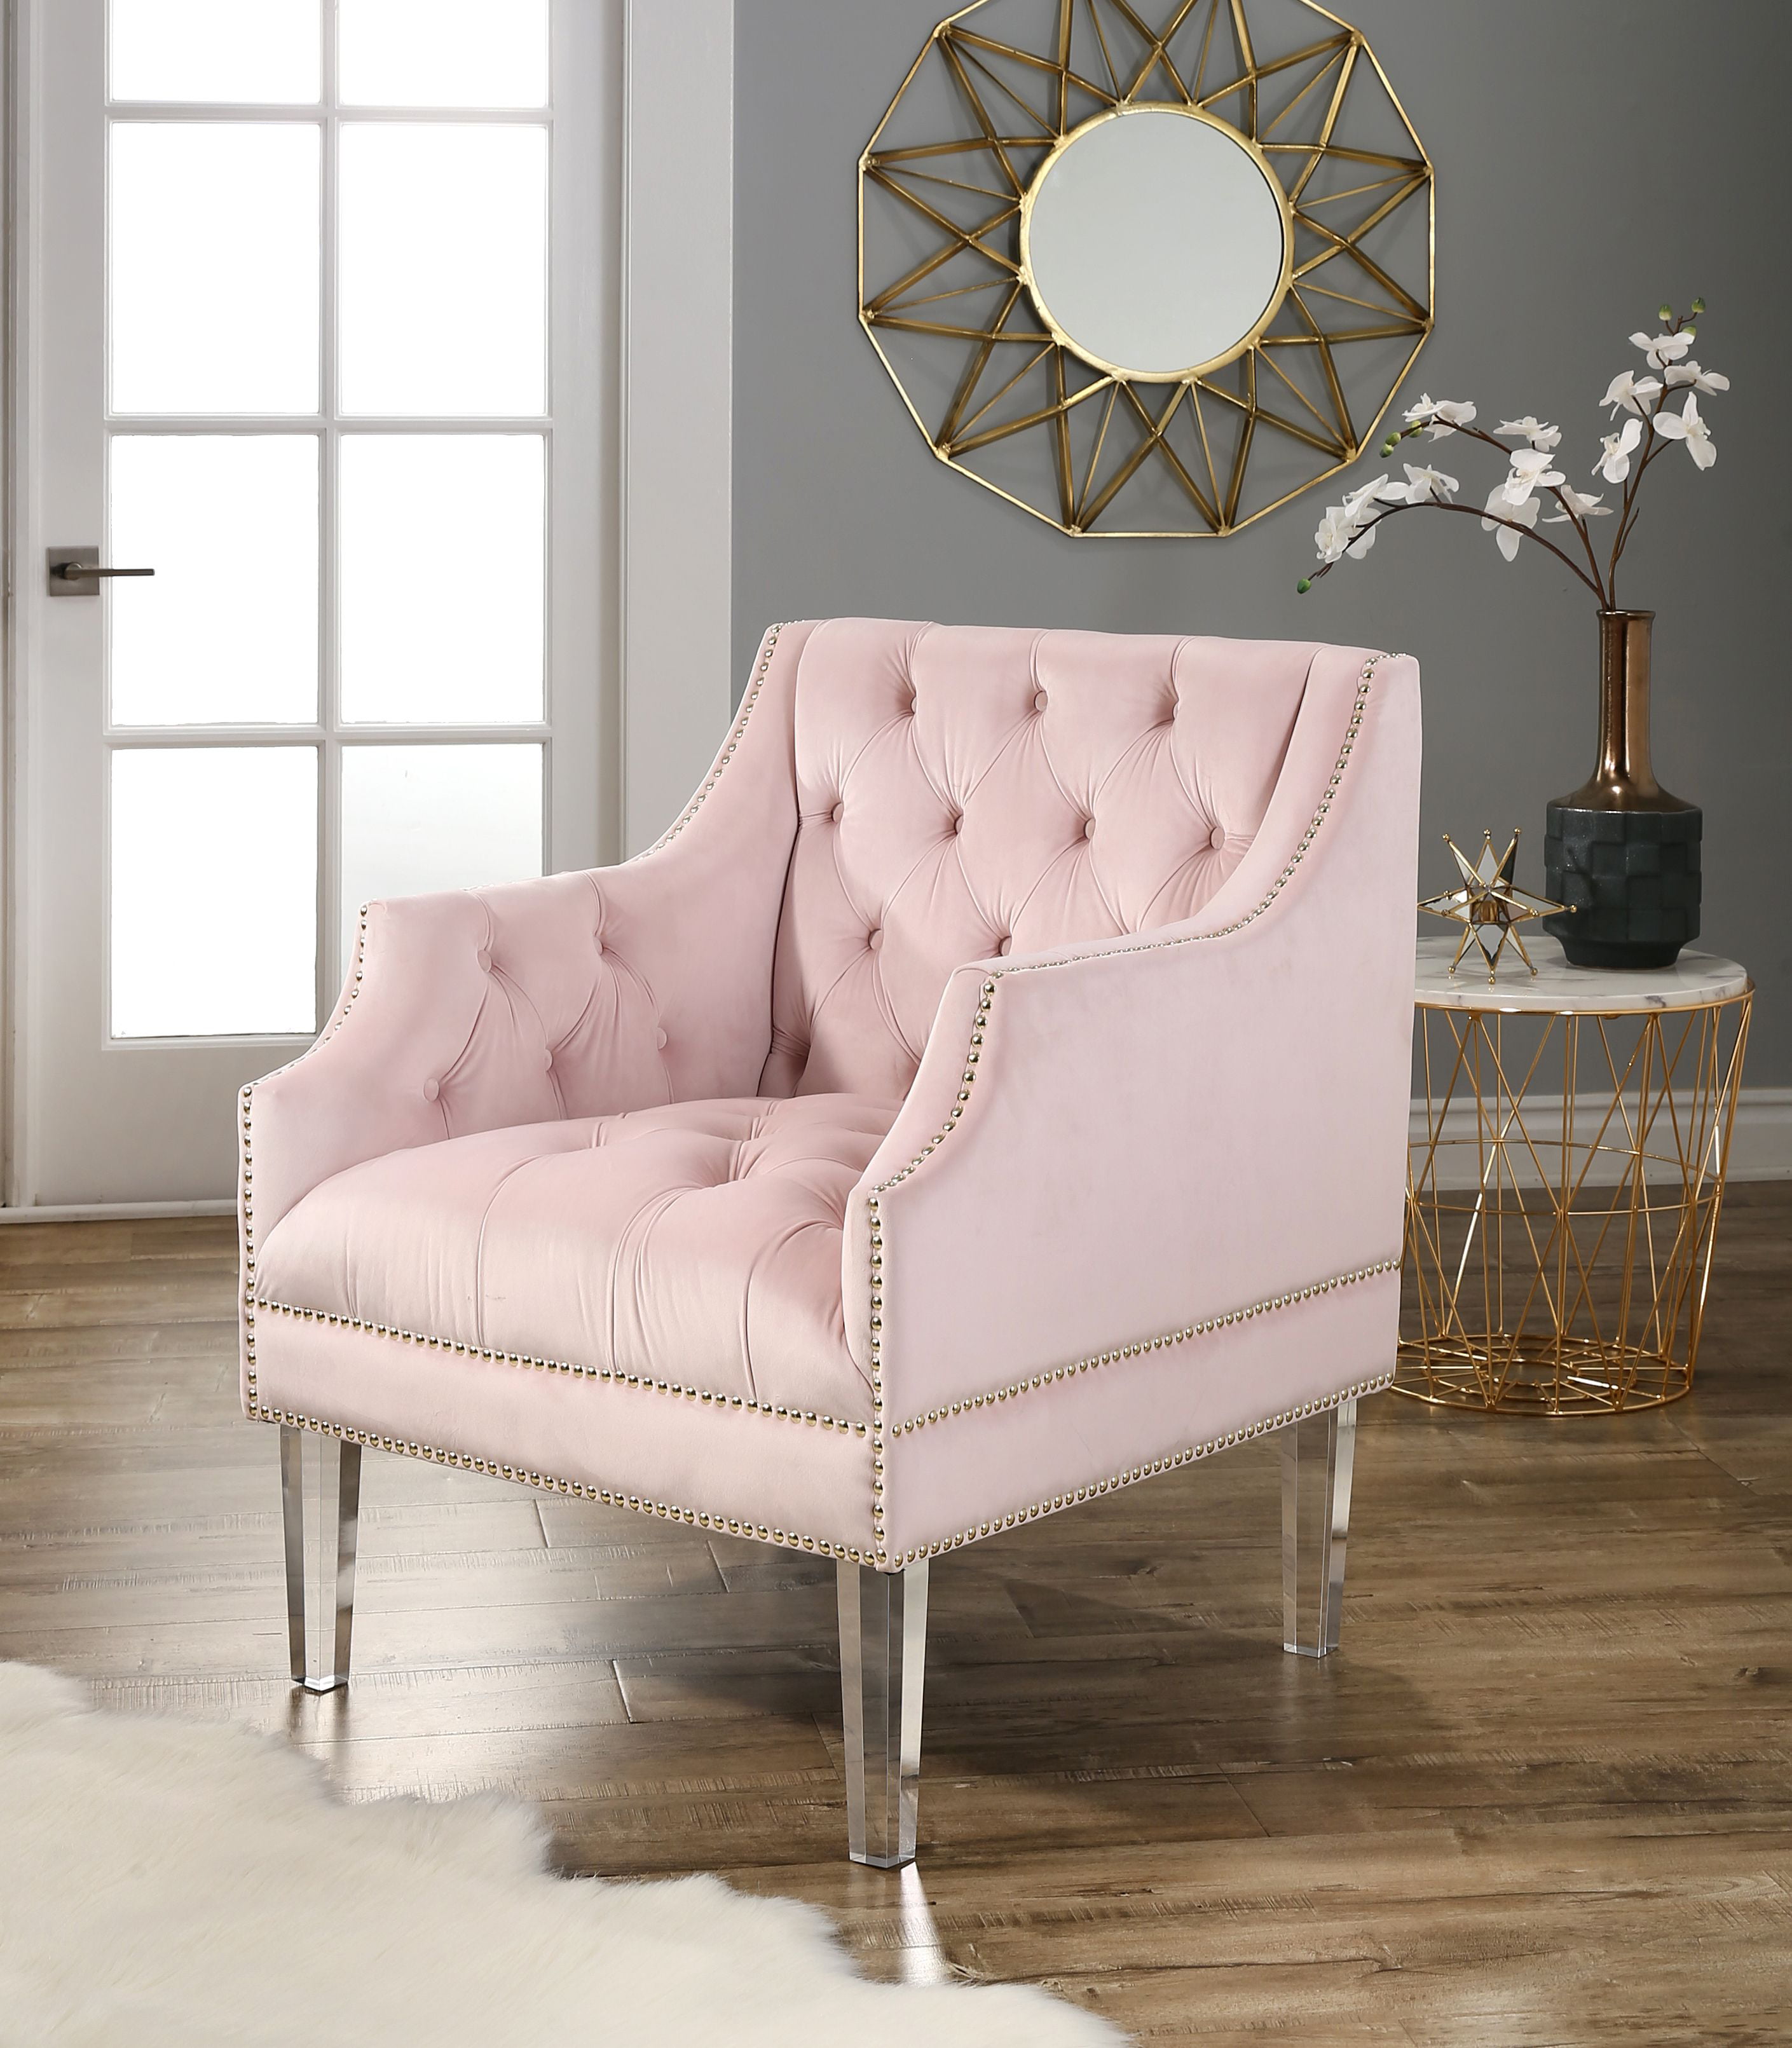 Devon & Claire Oliver Tufted Velvet Chair With Acrylic